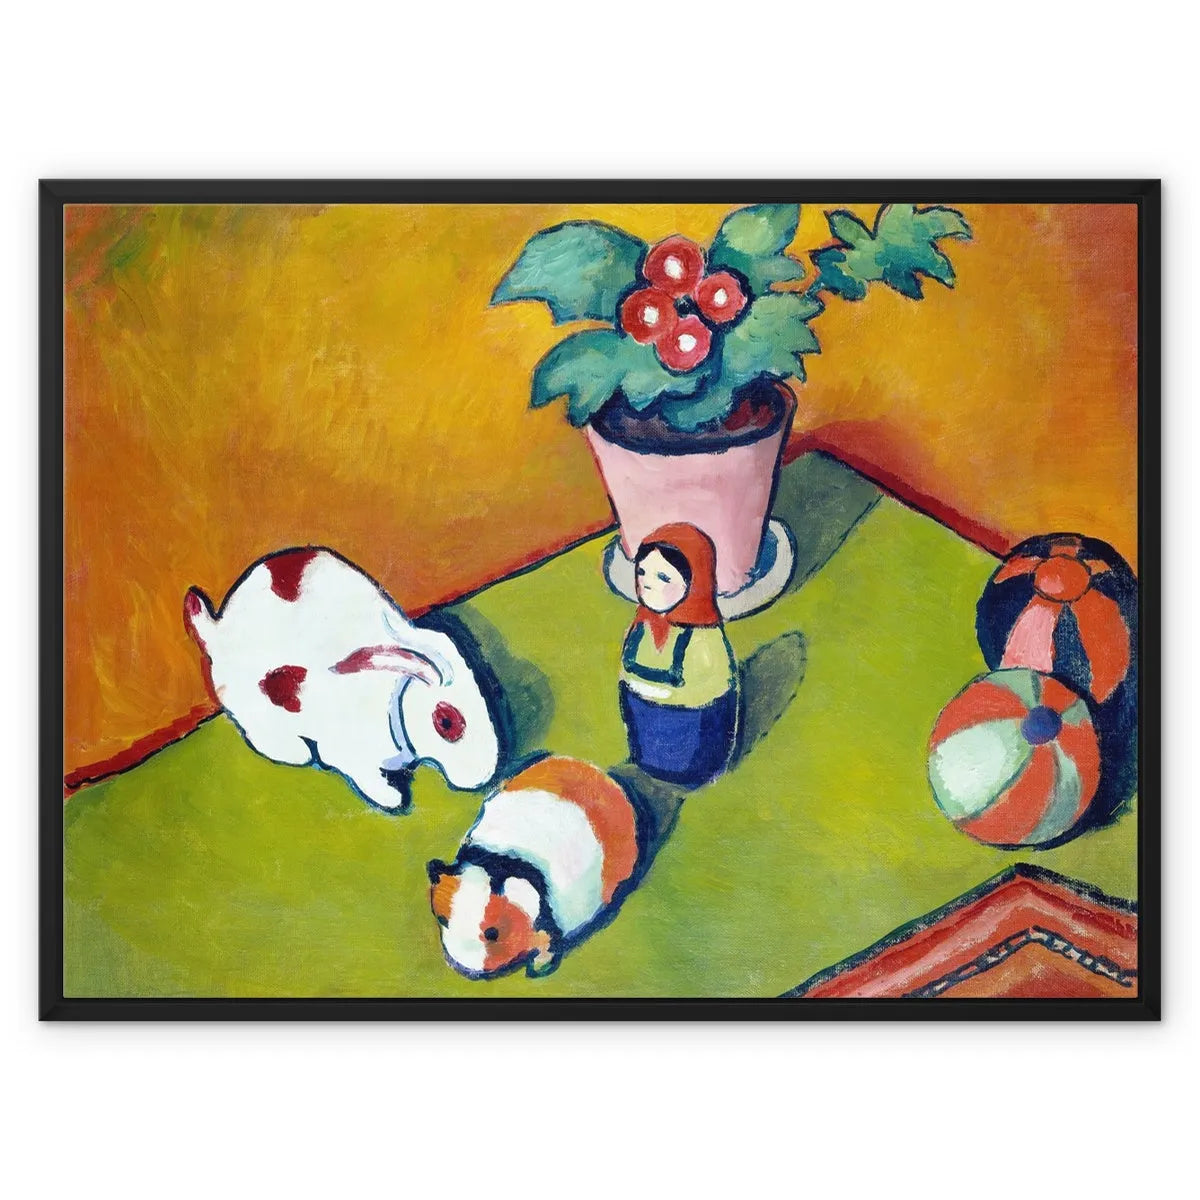 Little Walter’s Toys By August Macke Framed Canvas - 32’x24’ - Posters Prints & Visual Artwork - Aesthetic Art